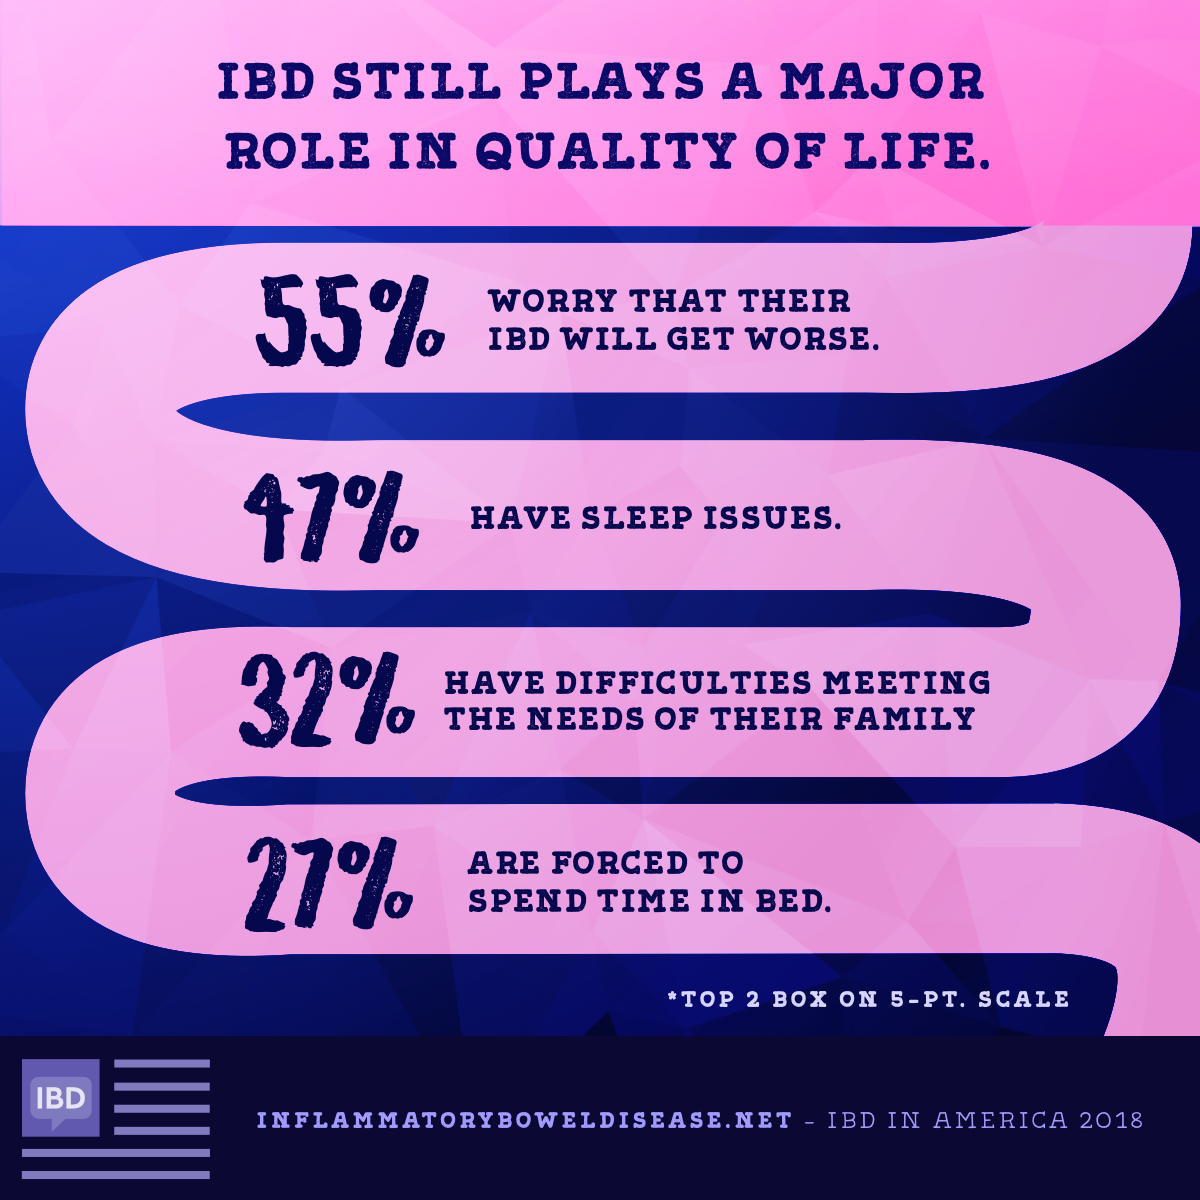 Infographic - IBD Quality of Life Information